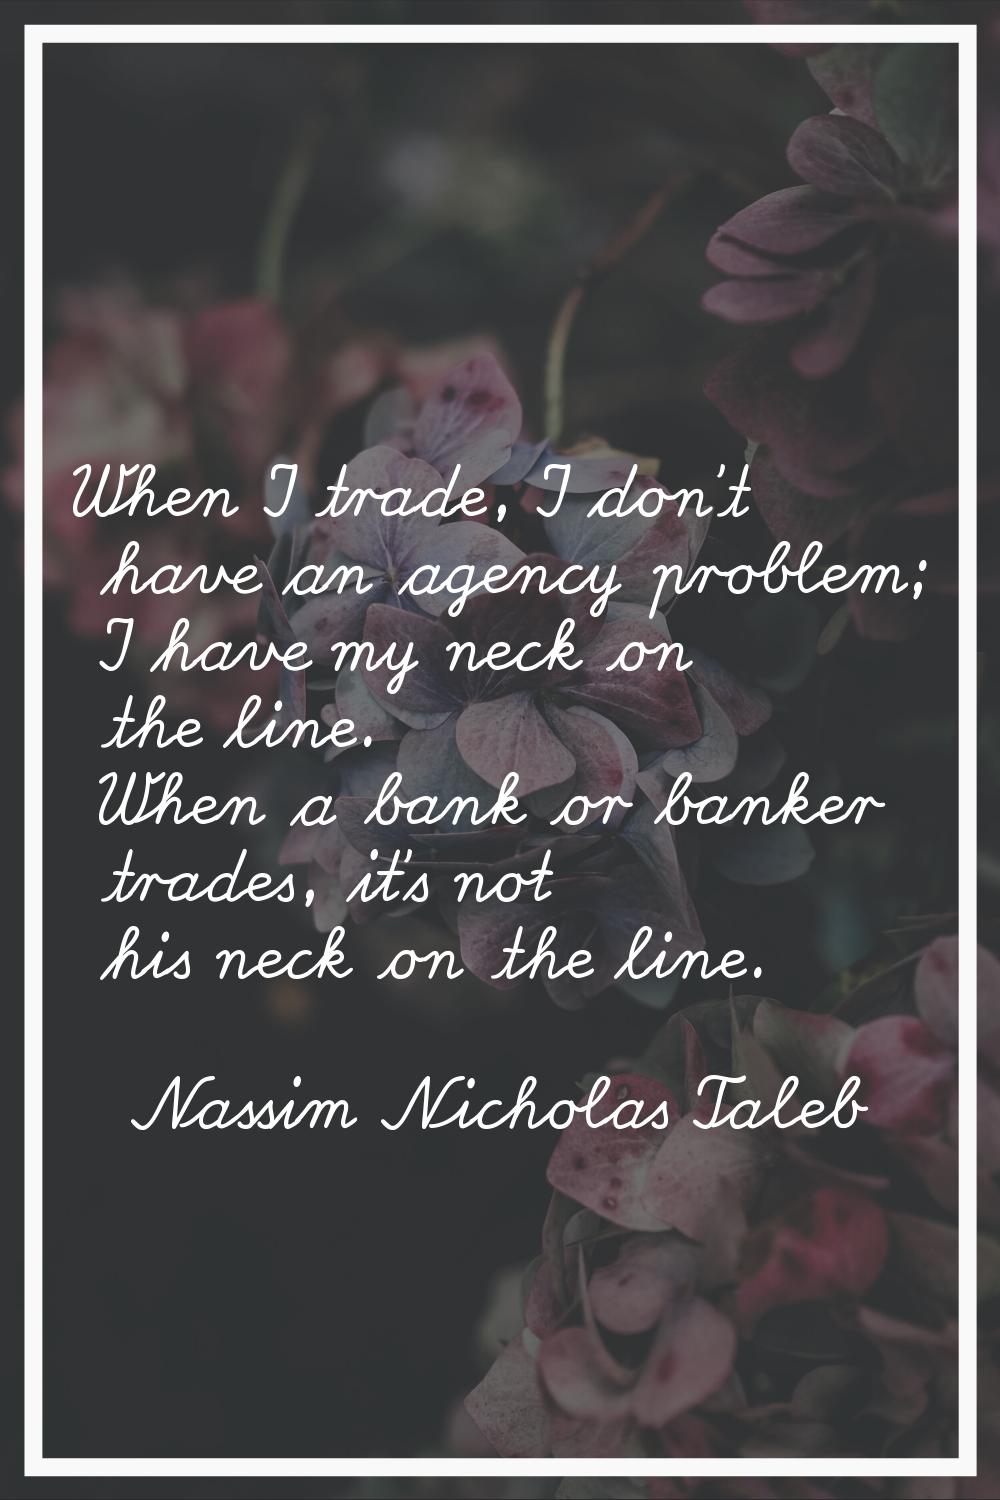 When I trade, I don't have an agency problem; I have my neck on the line. When a bank or banker tra